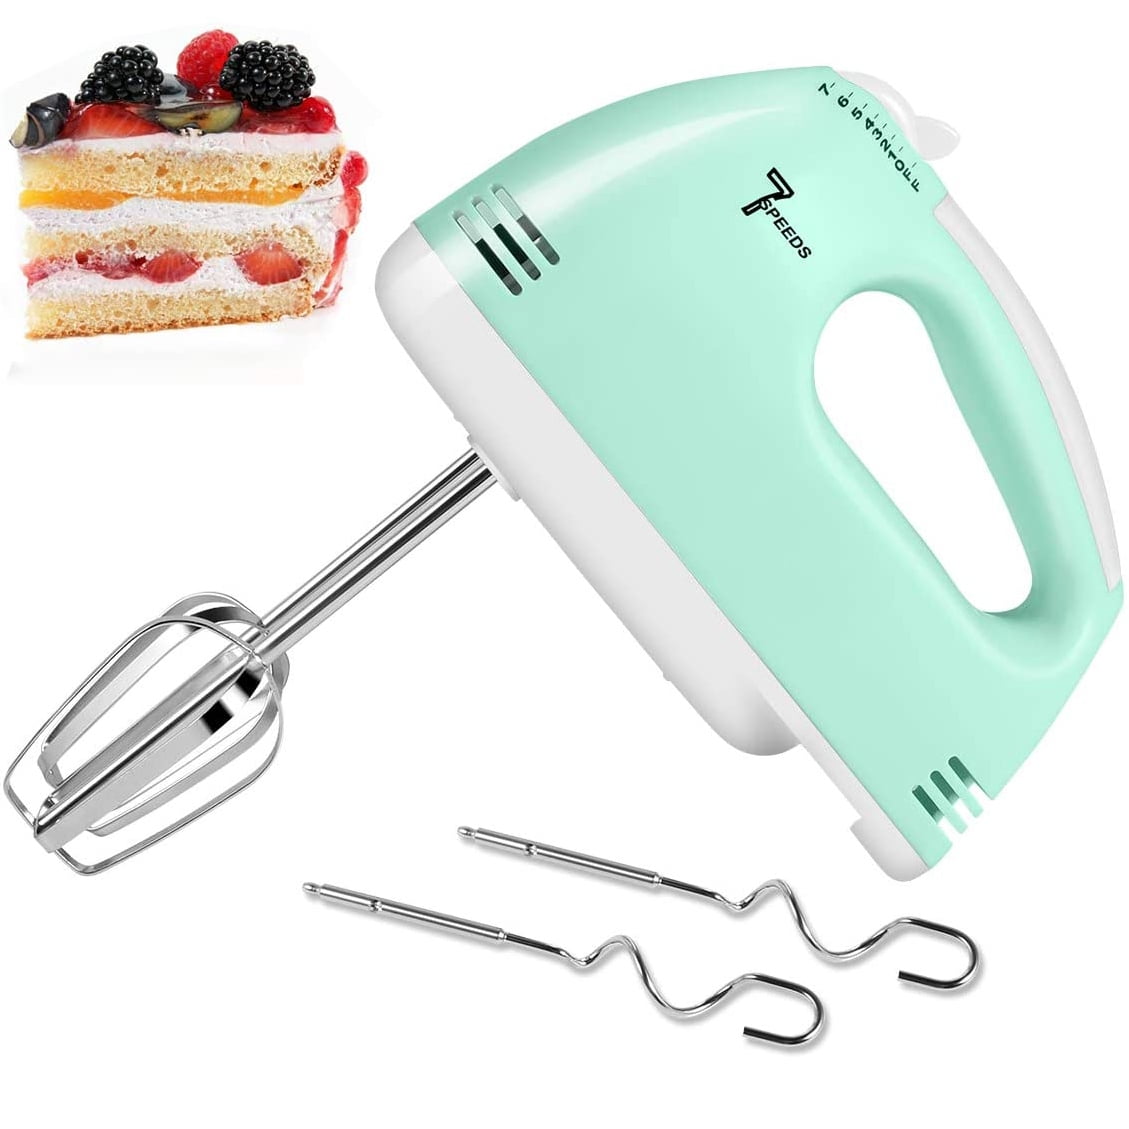 PLUSBRAVO Electric Hand Mixer for Kitchen 7 Speed with Whisk Dough Hooks  for Mixing Cookies Brownies Cakes, White